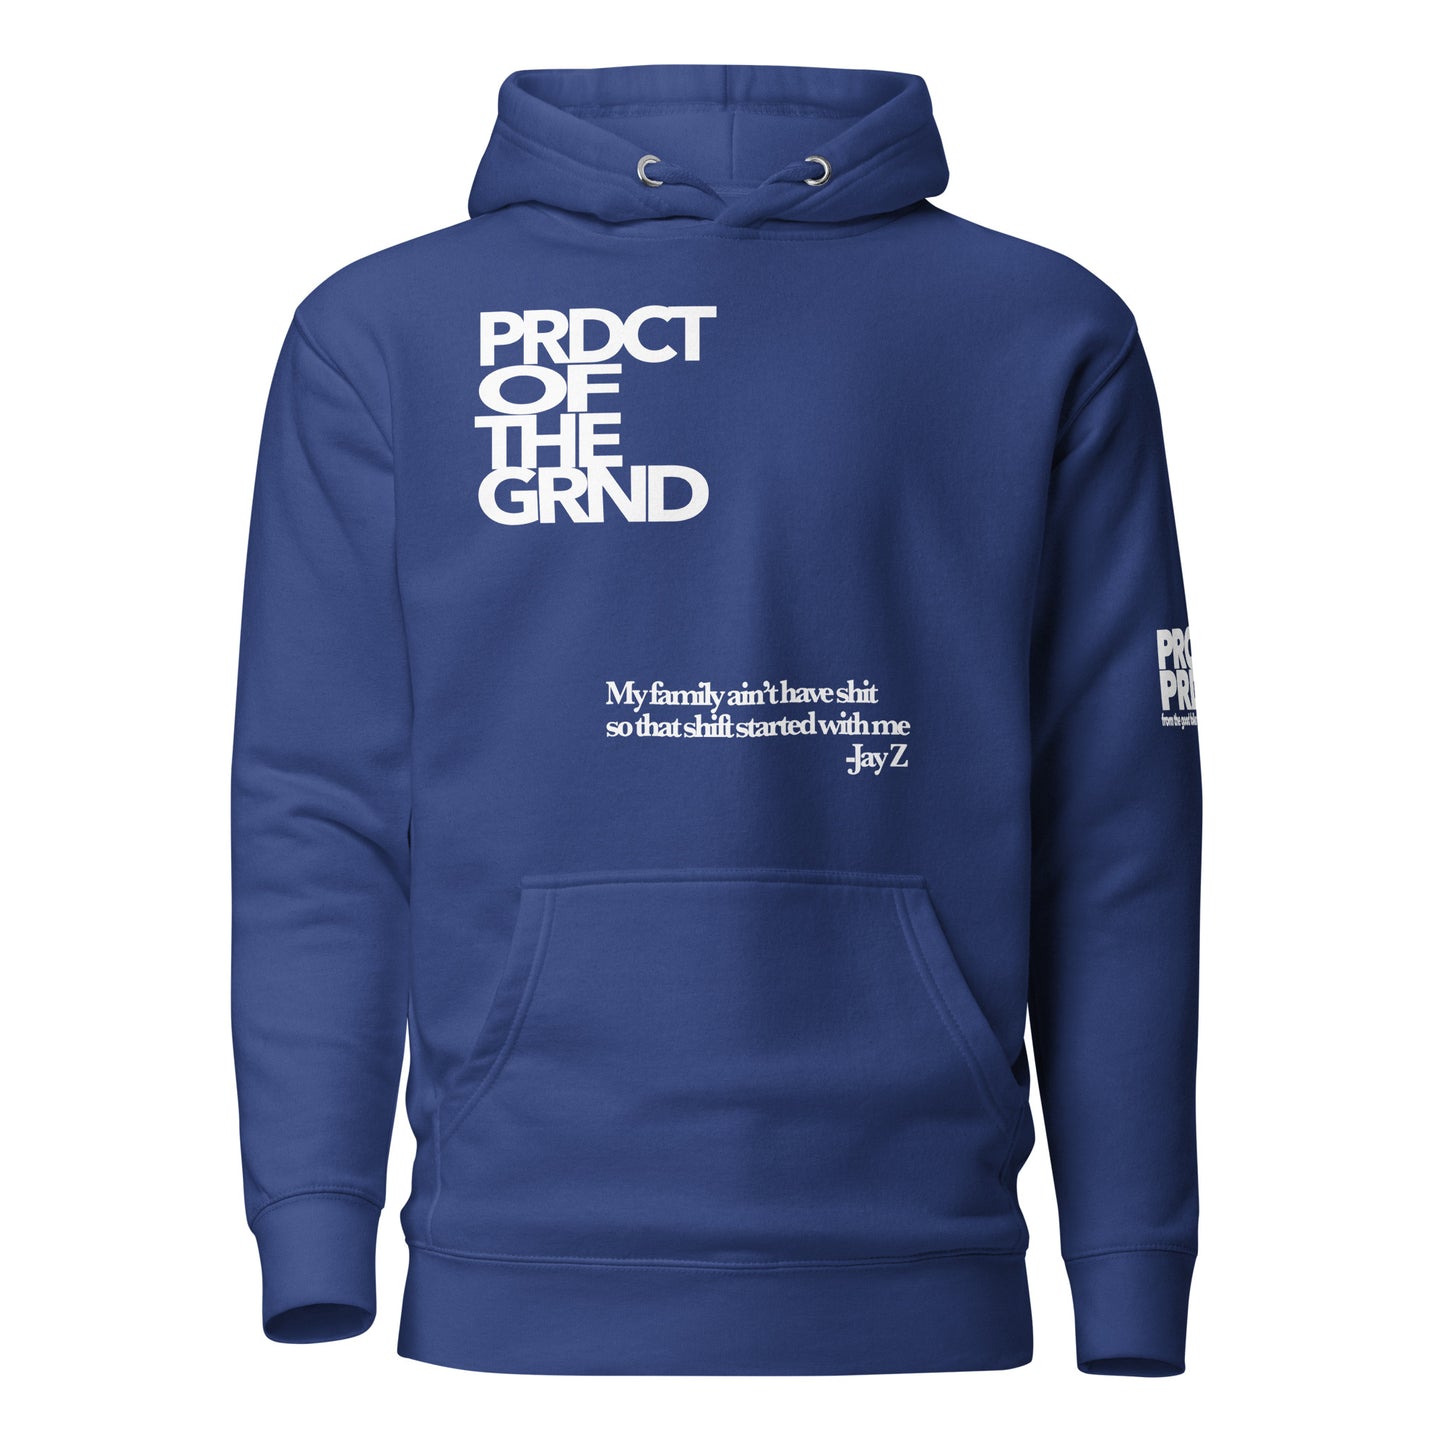 "Product of the Grind" Hoodie